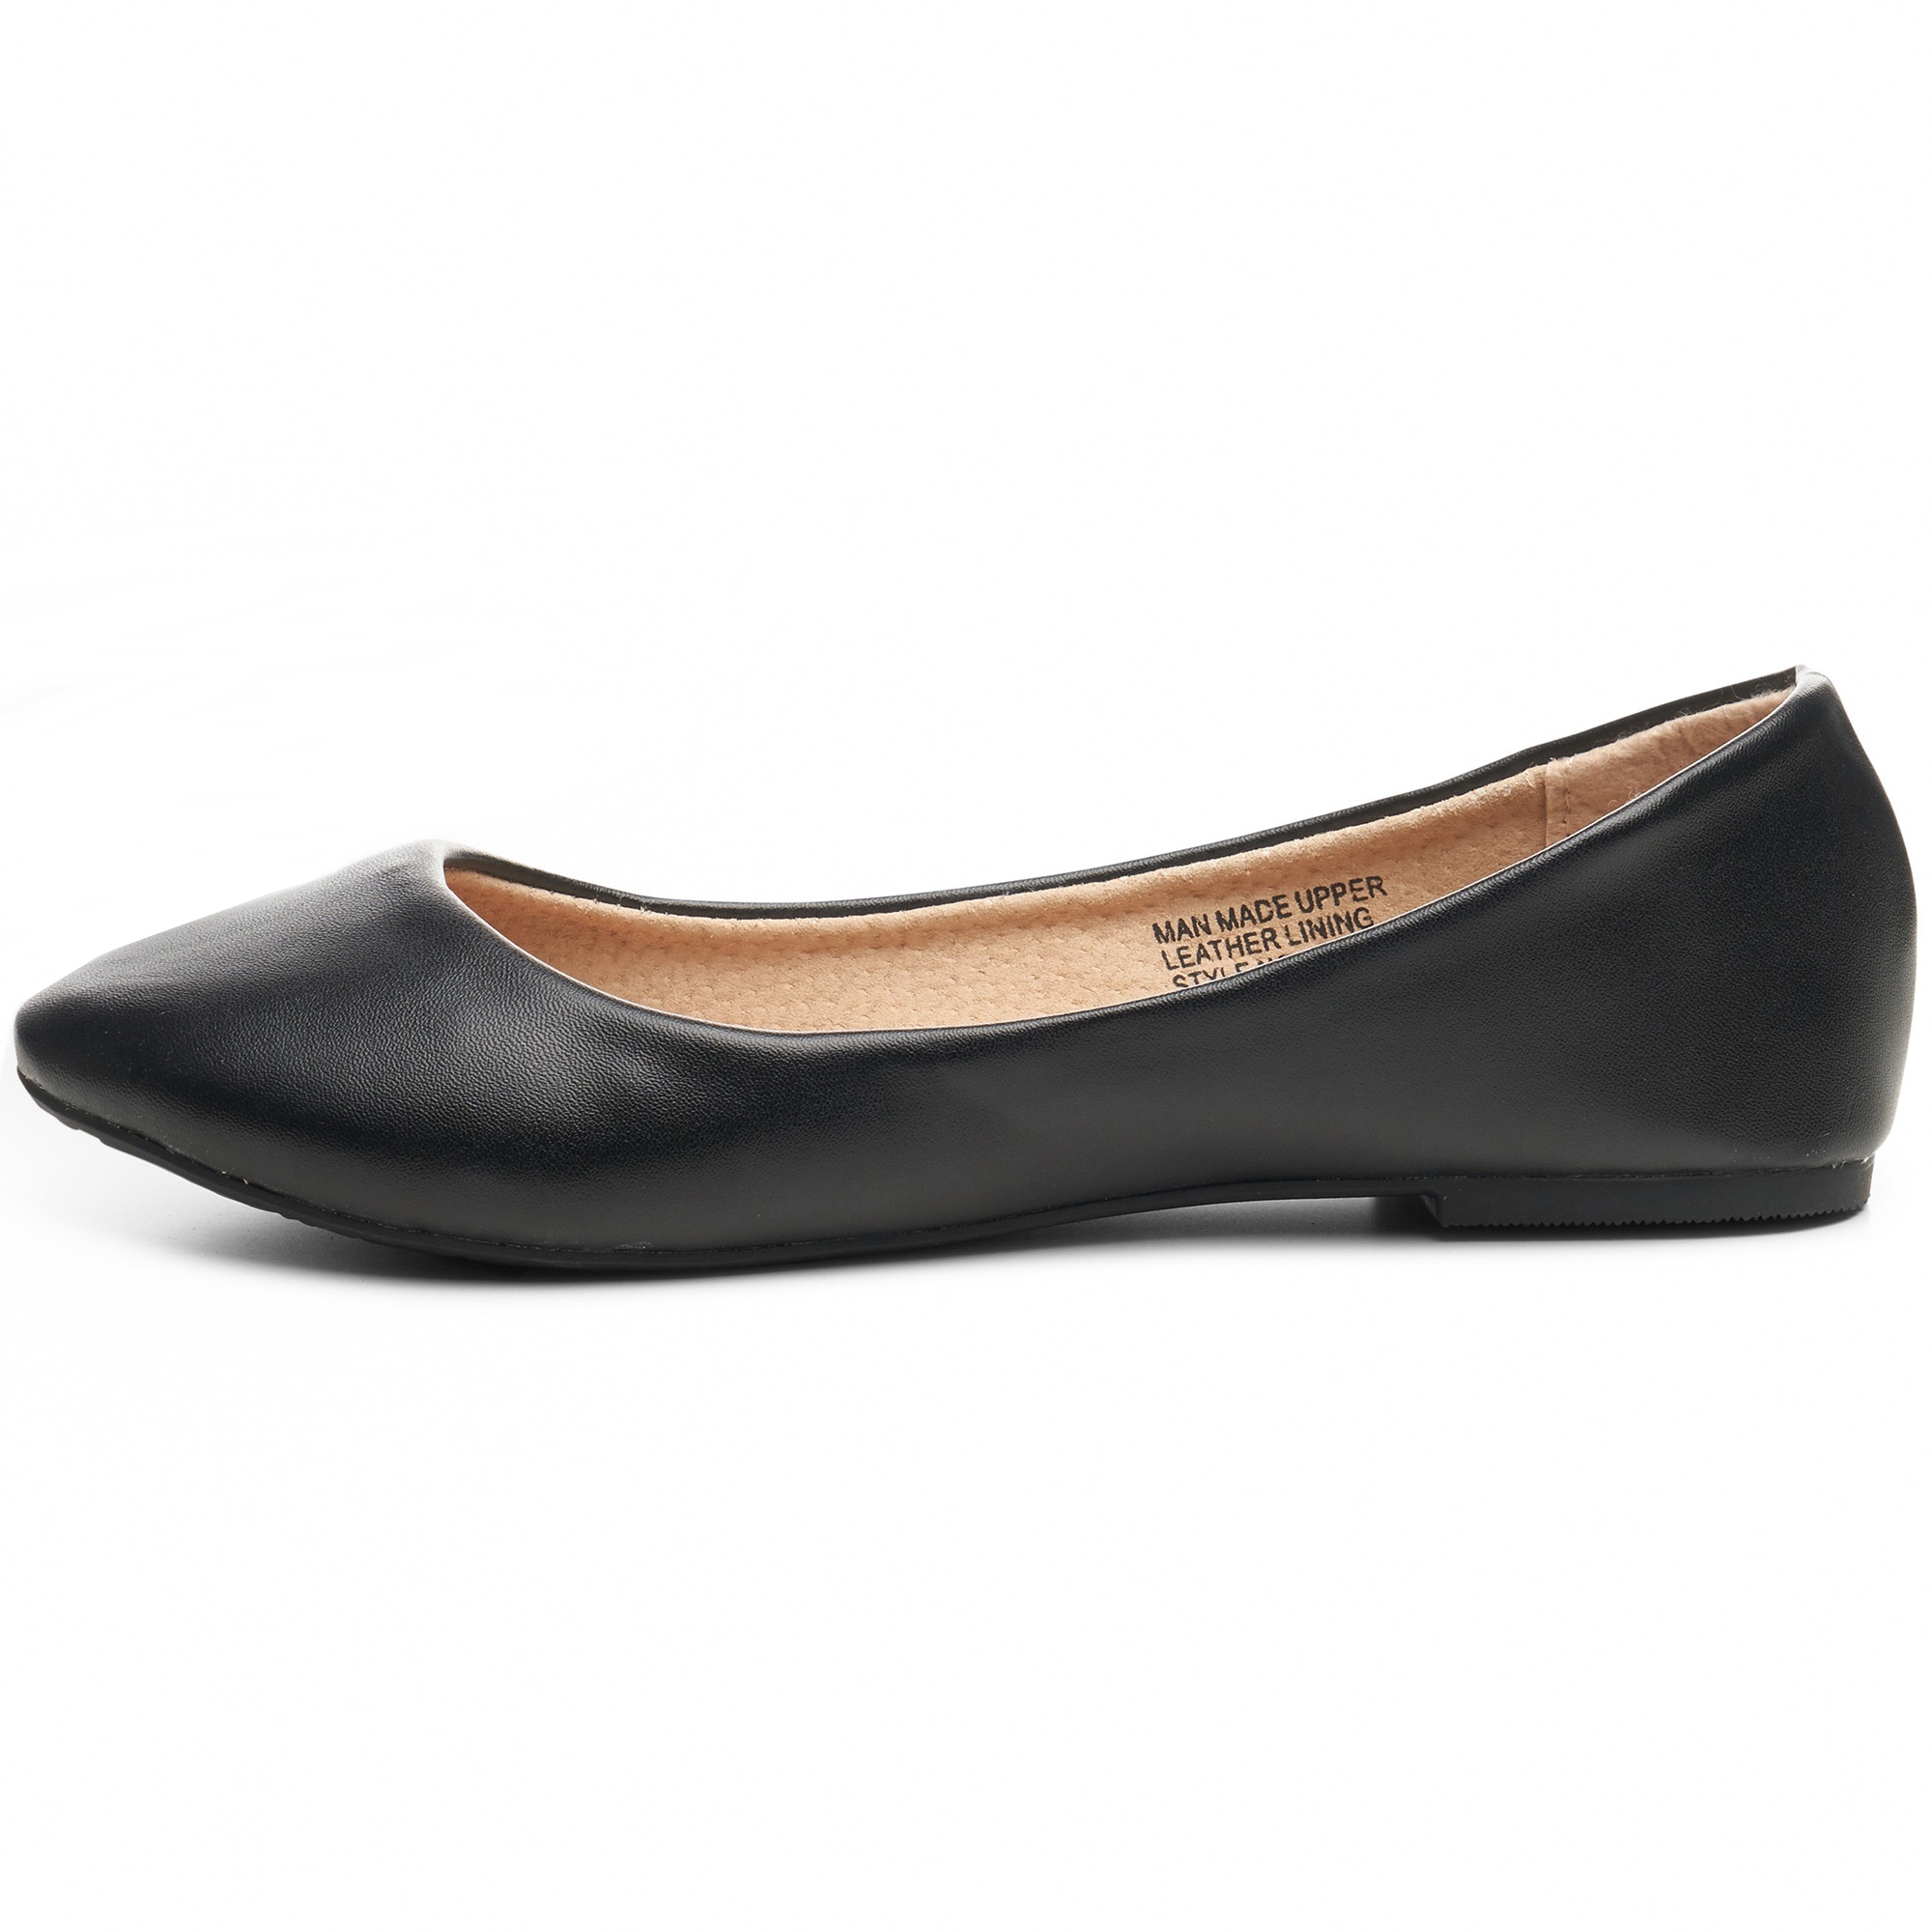 Alpine Swiss Pierina Womens Ballet Flats Leather Lined Classic Slip On Shoes - image 4 of 7